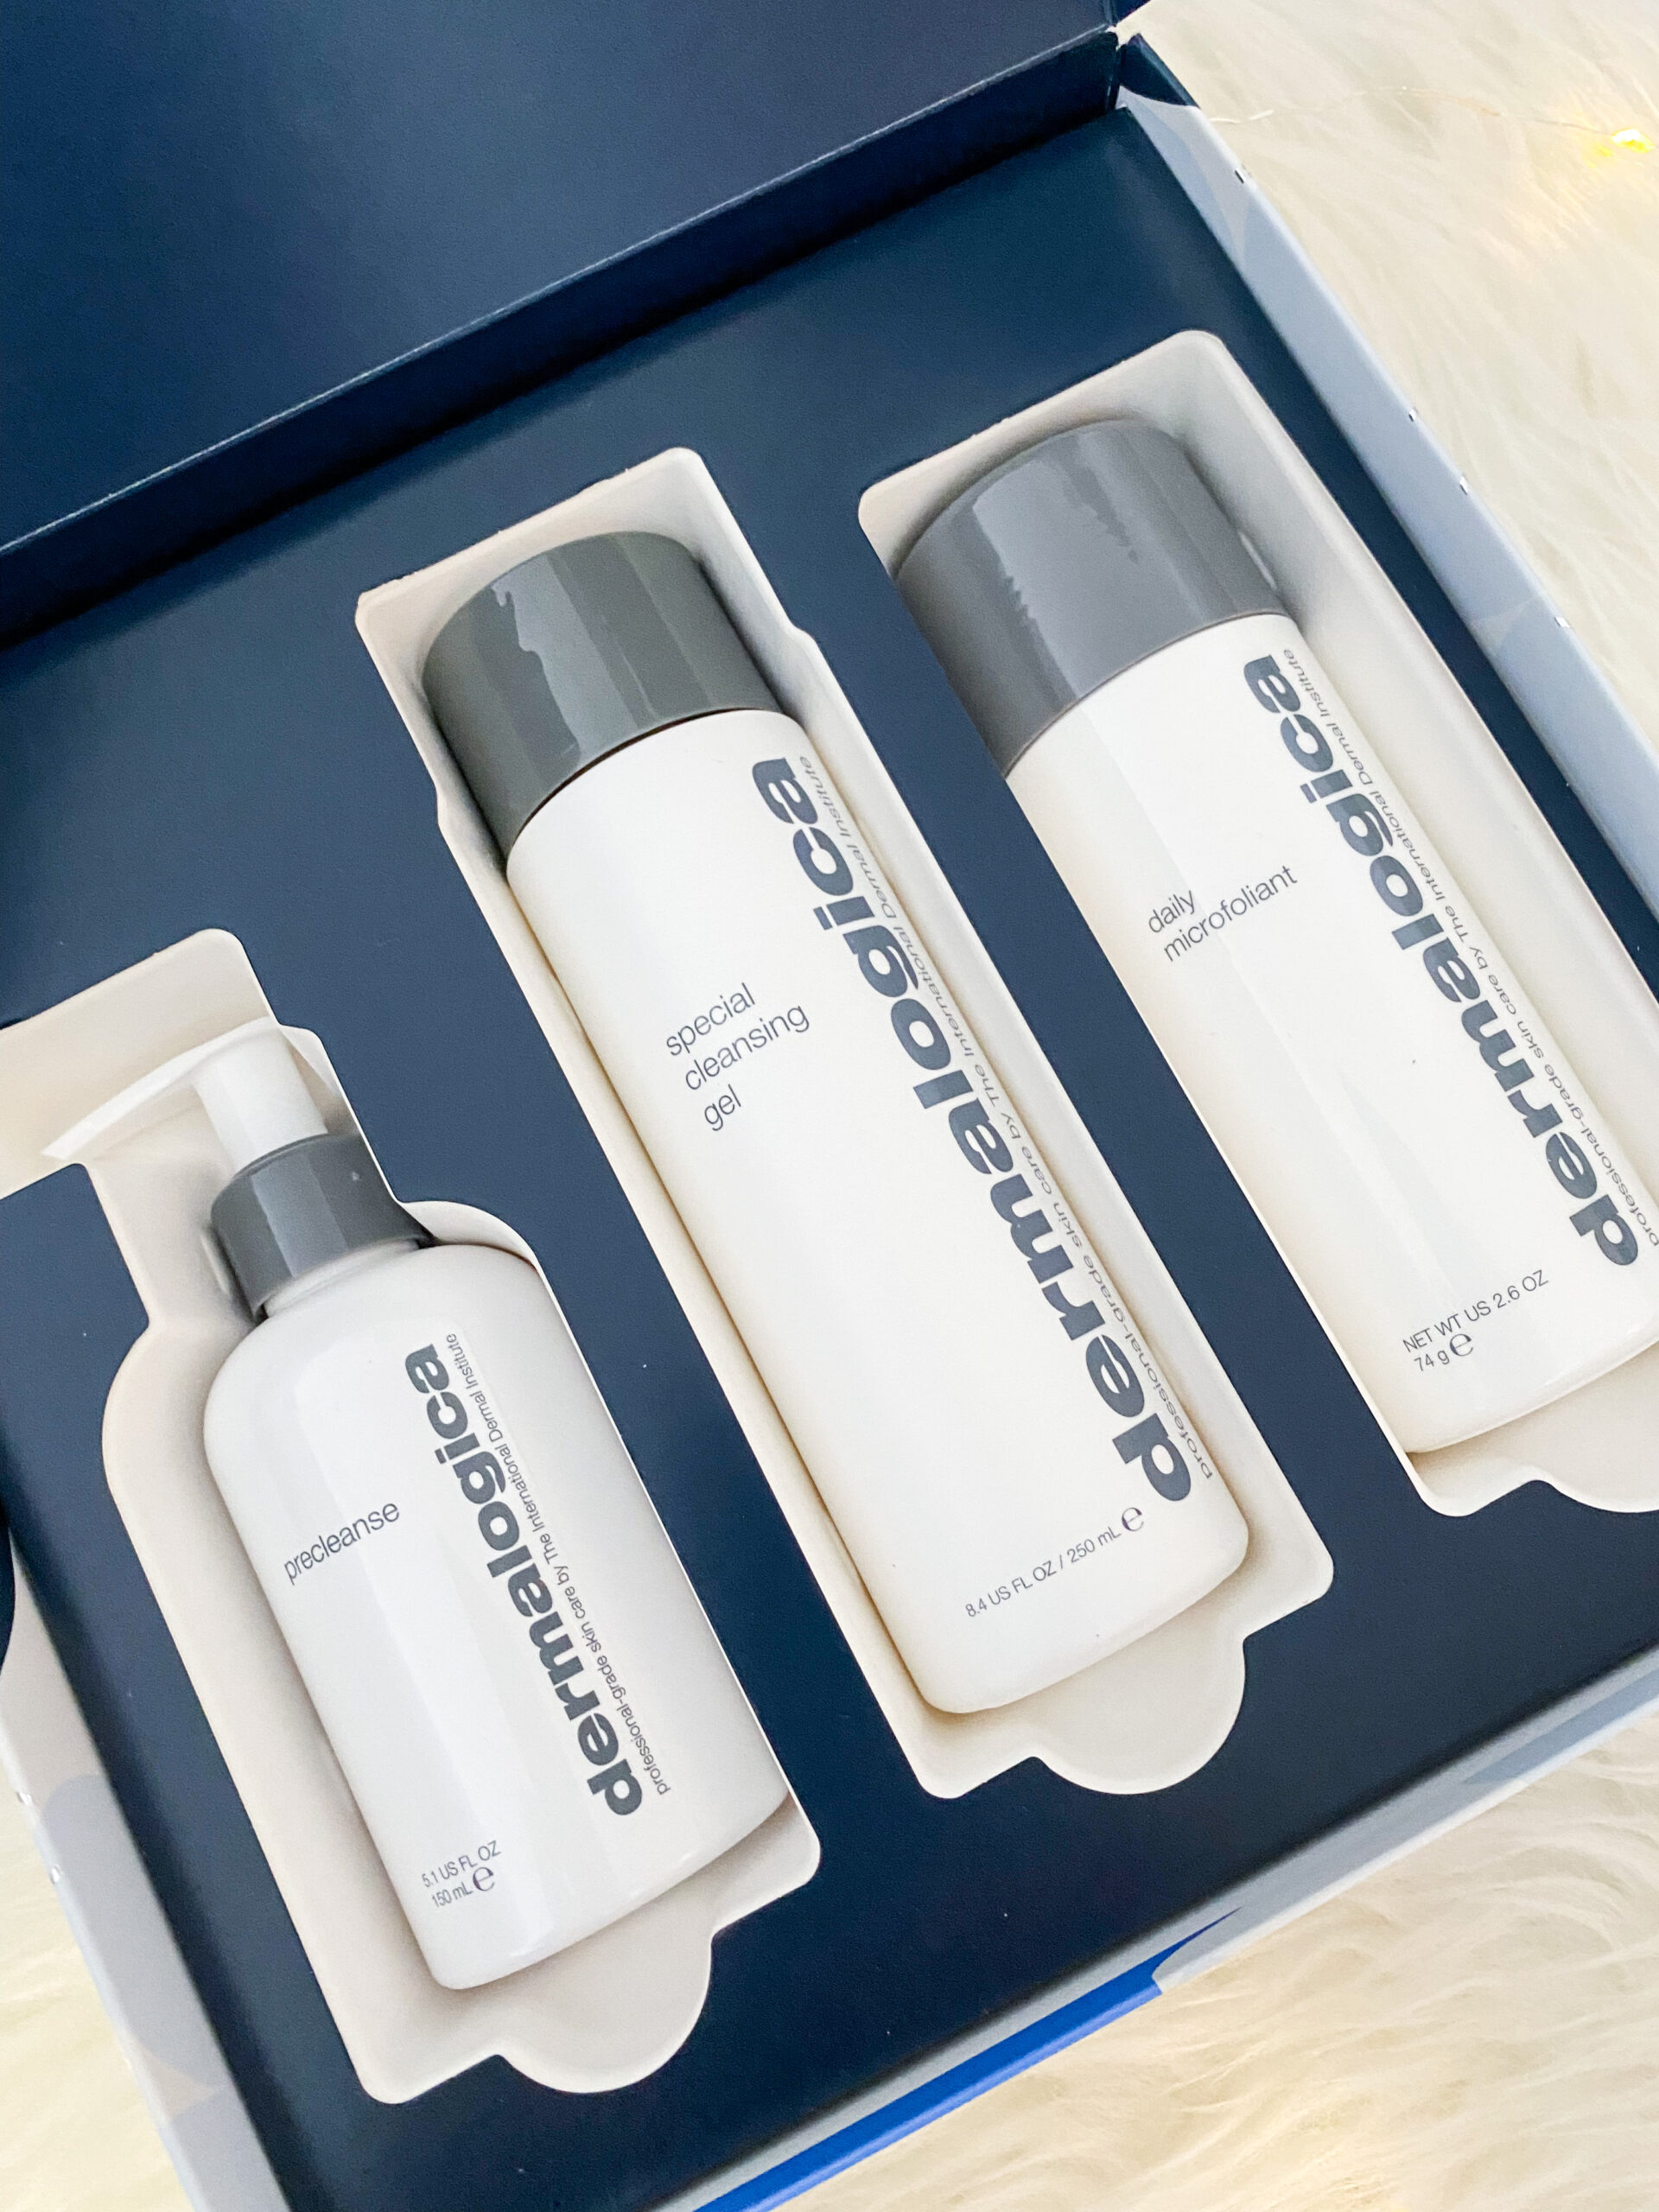 Demalogica products on Livin' Life with style